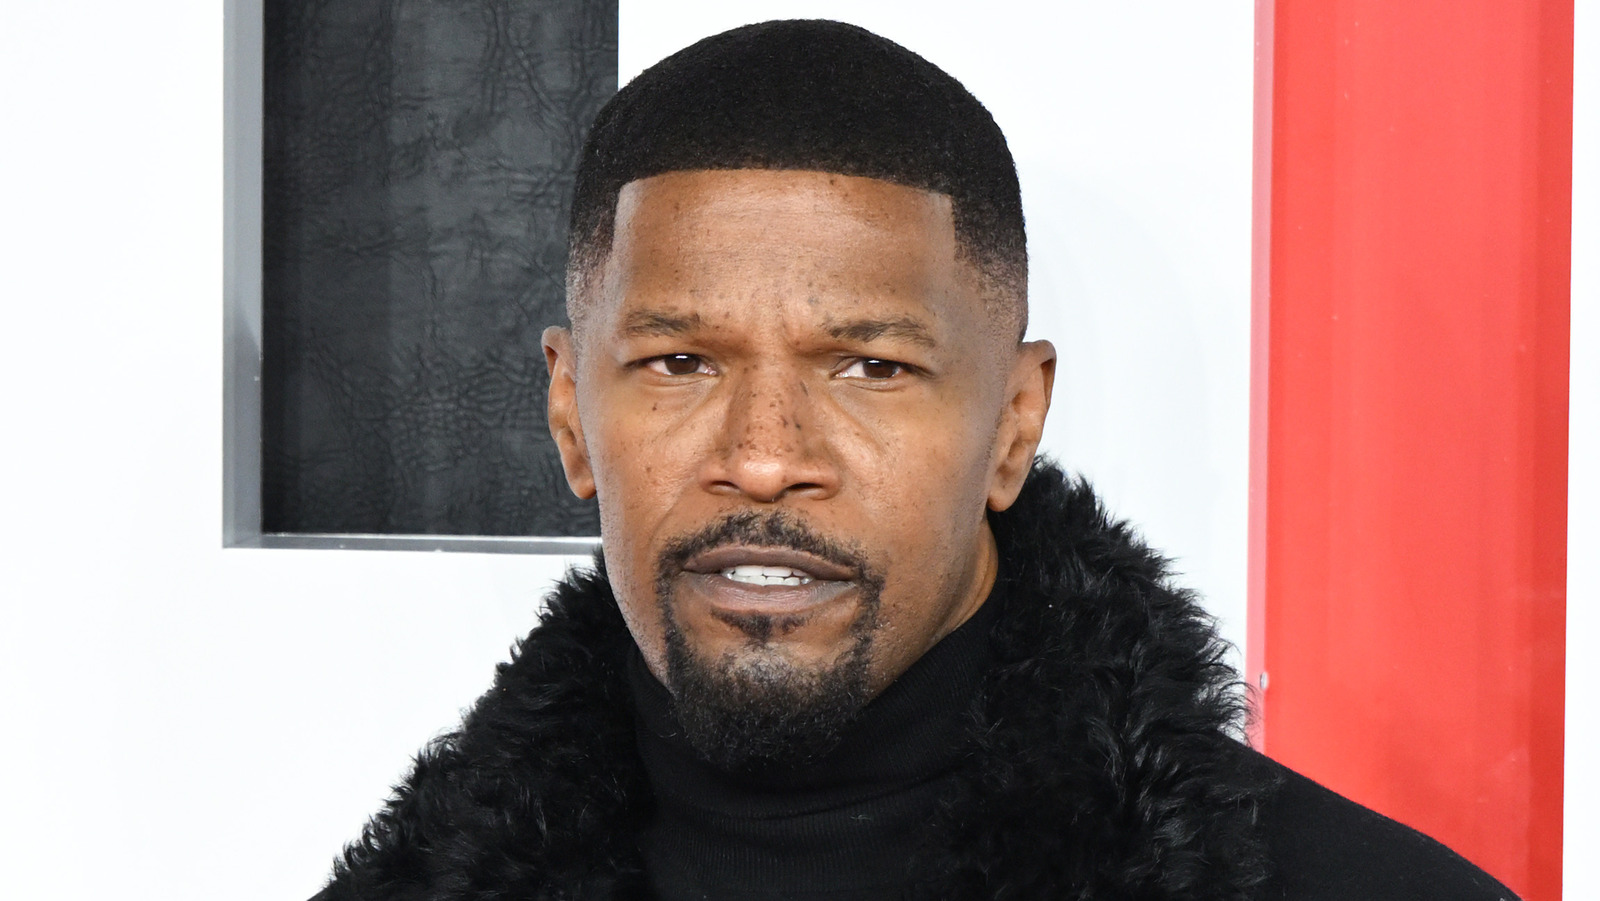 How Jamie Foxx Played A Role In Rescuing A Man From A Fiery Car Crash Internewscast Journal 